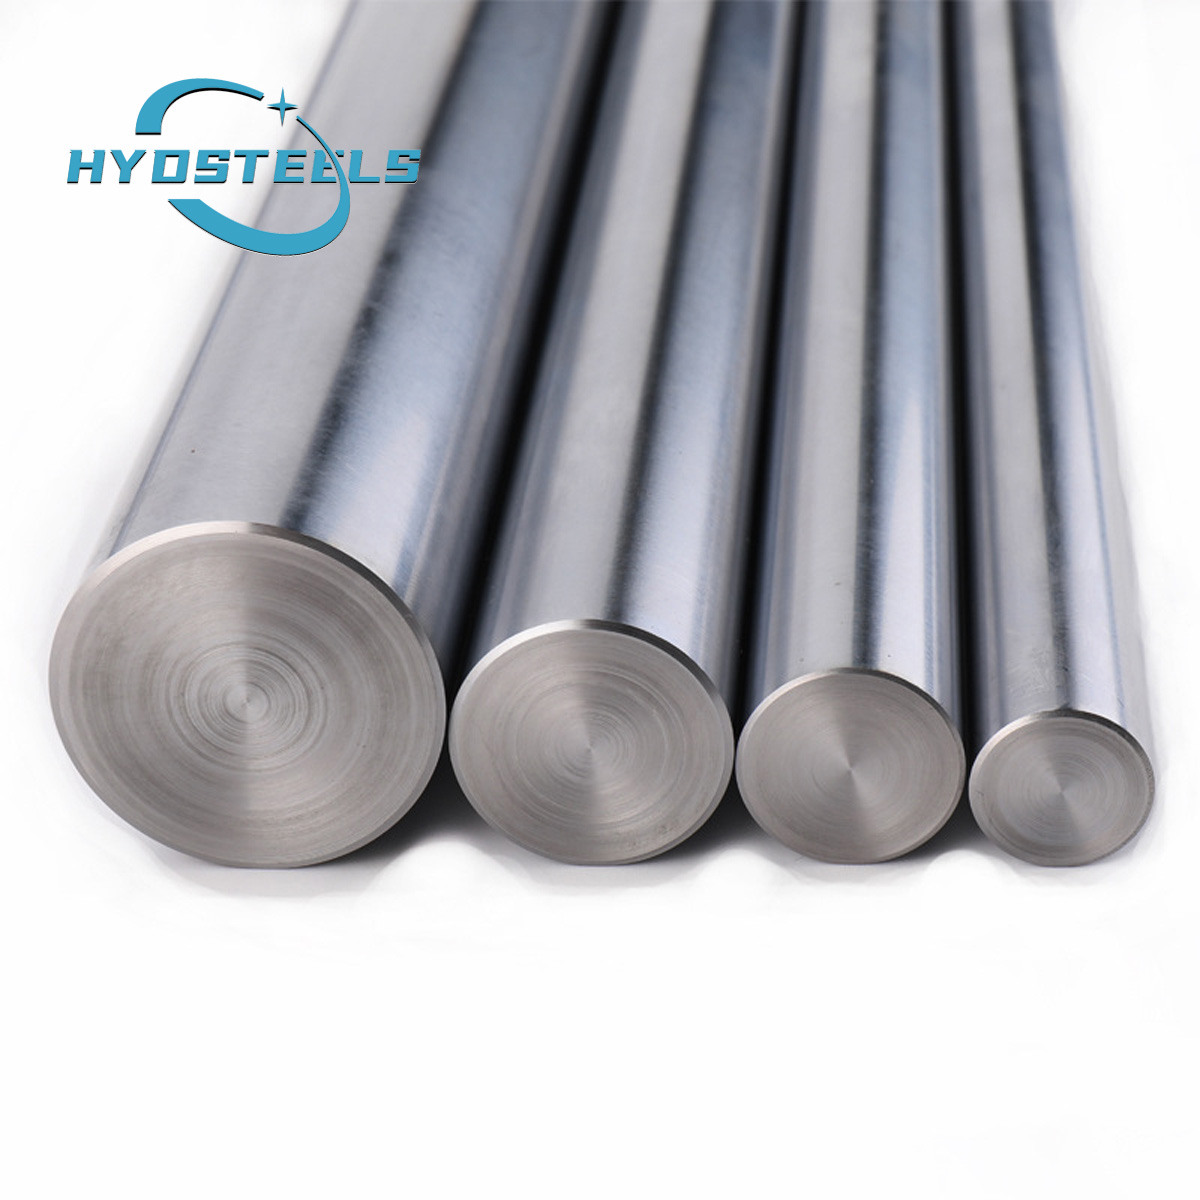  High Quality Hard Chrome Rod for Hydraulic Cylinder Manufacturer